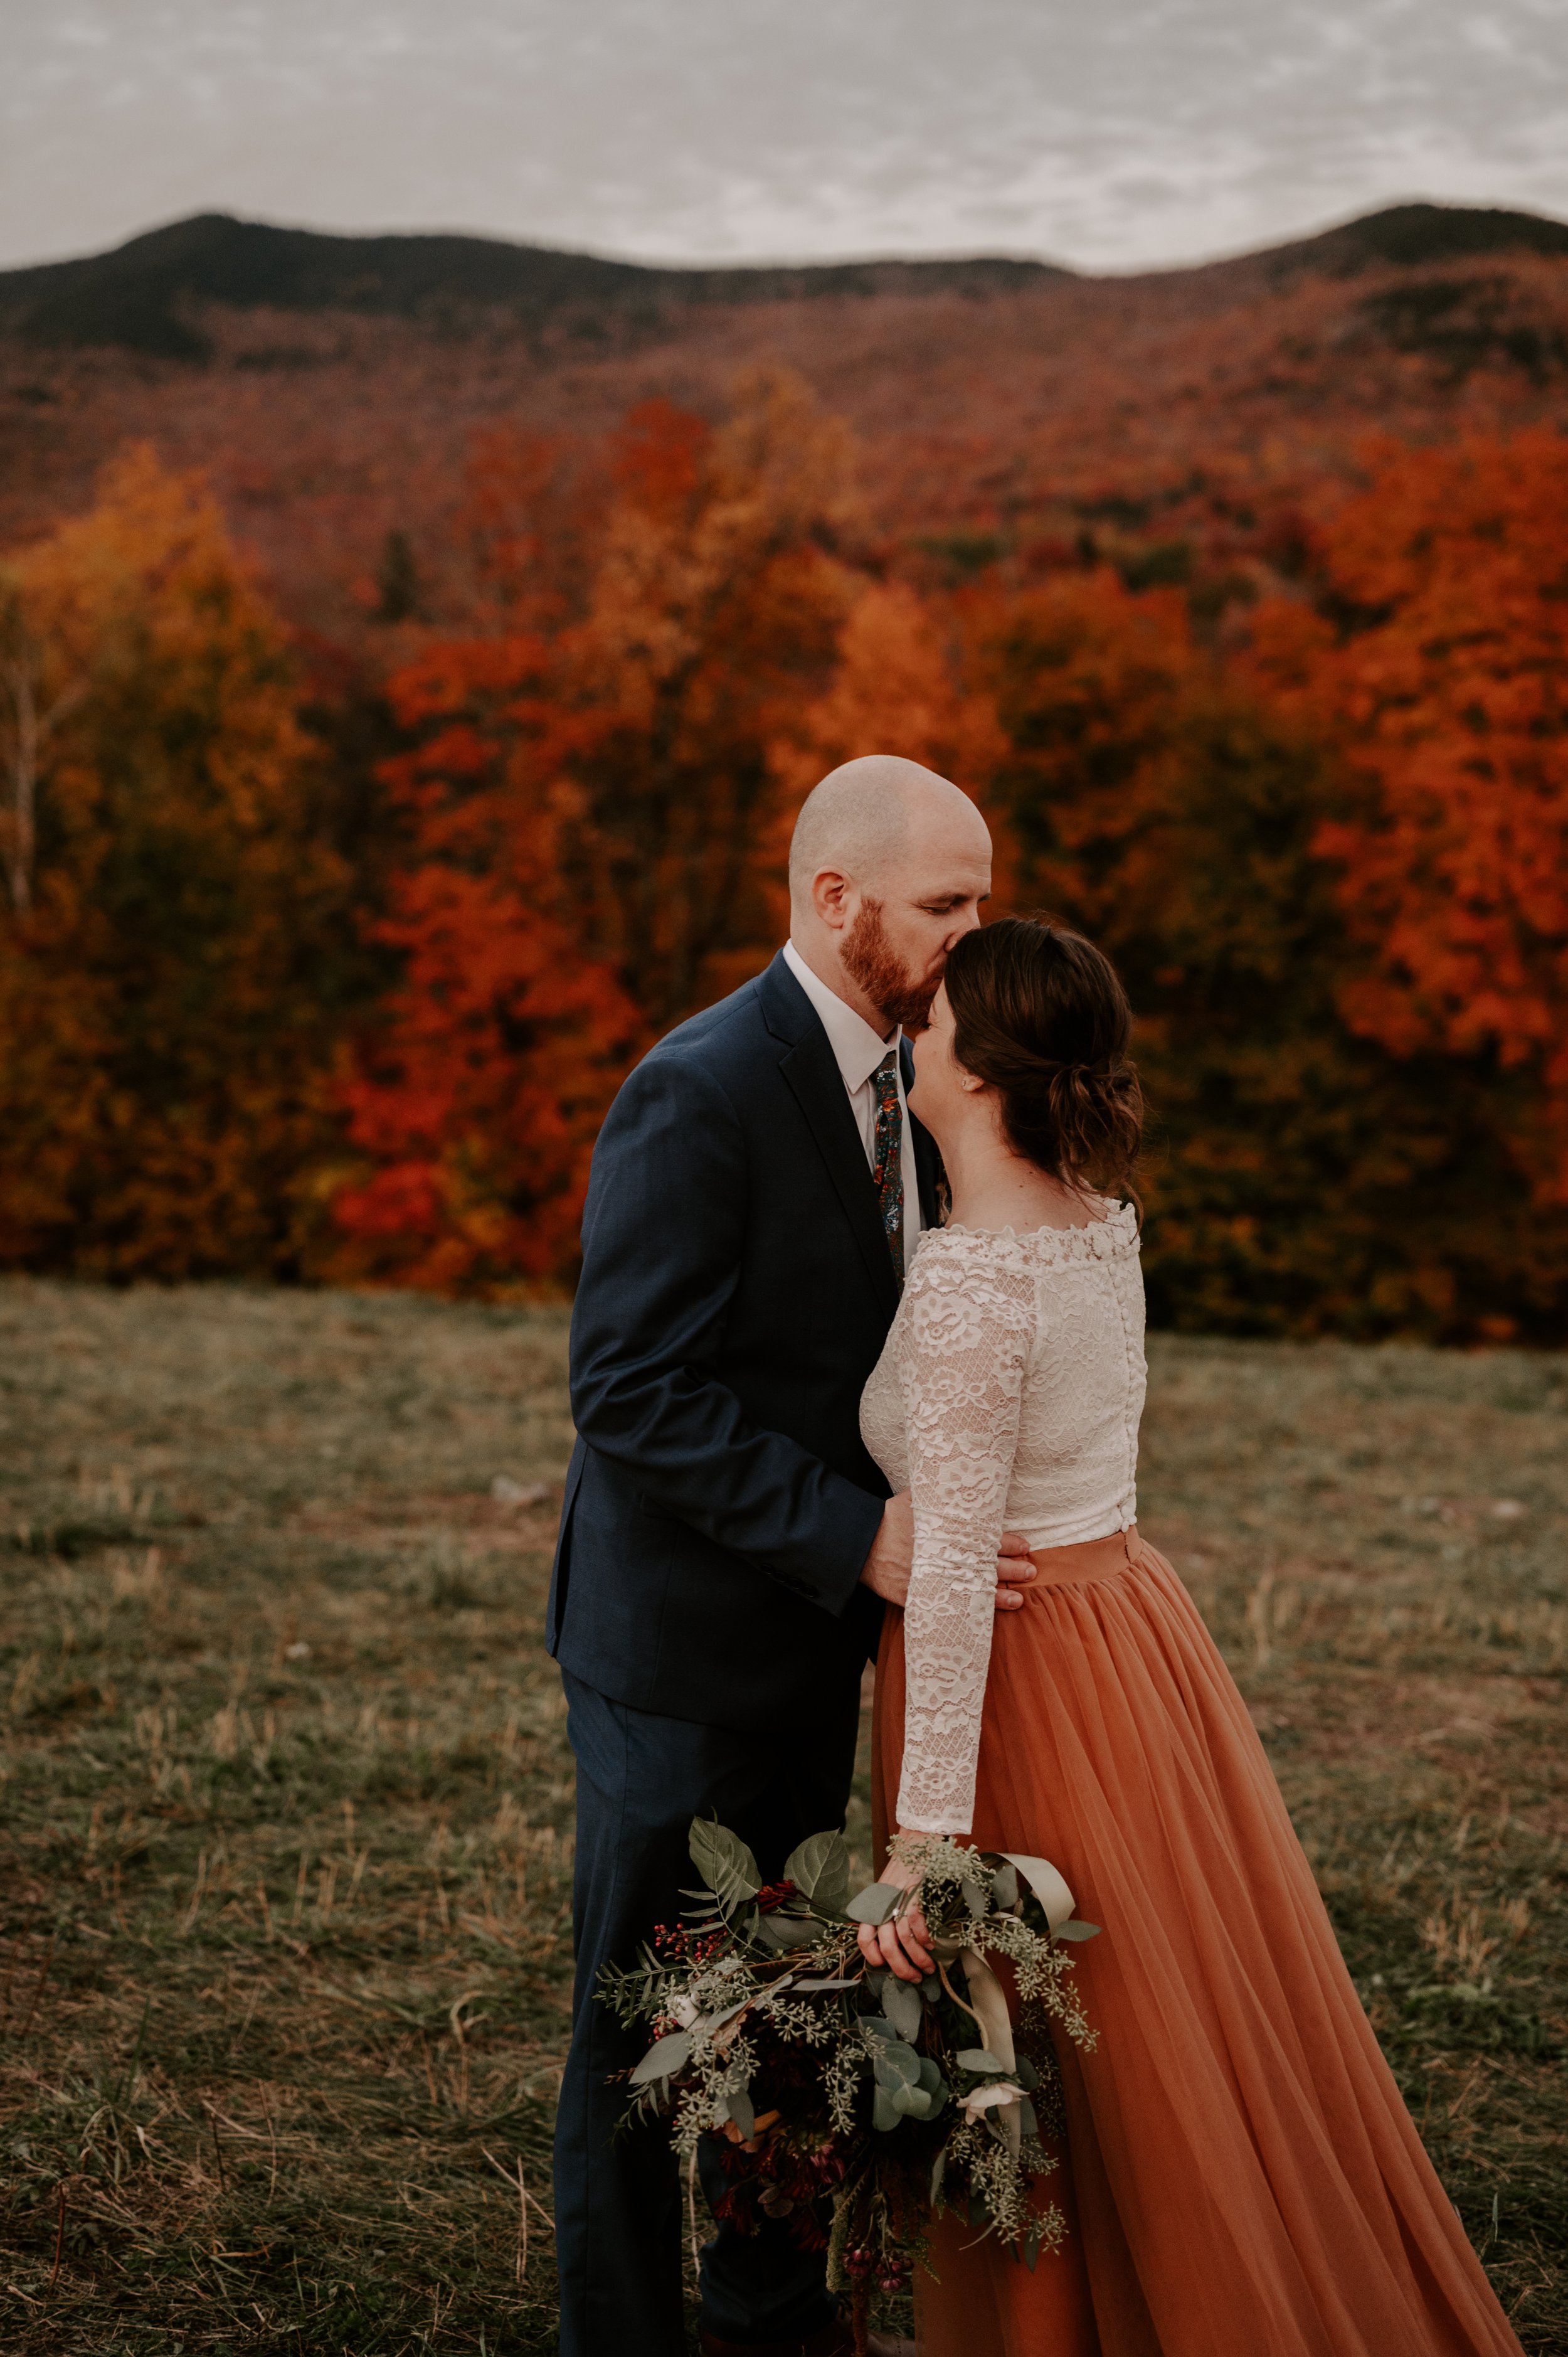 Stowe Vermont wedding and elopement photographer. Stowe Vermont wedding and elopement photographer. Stowe Vermont wedding photographer. Trapp family lodge wedding photographer. Edson Hill wedding photographer. Topnotch wedding photographer. The Woodstock Inn wedding photographer 